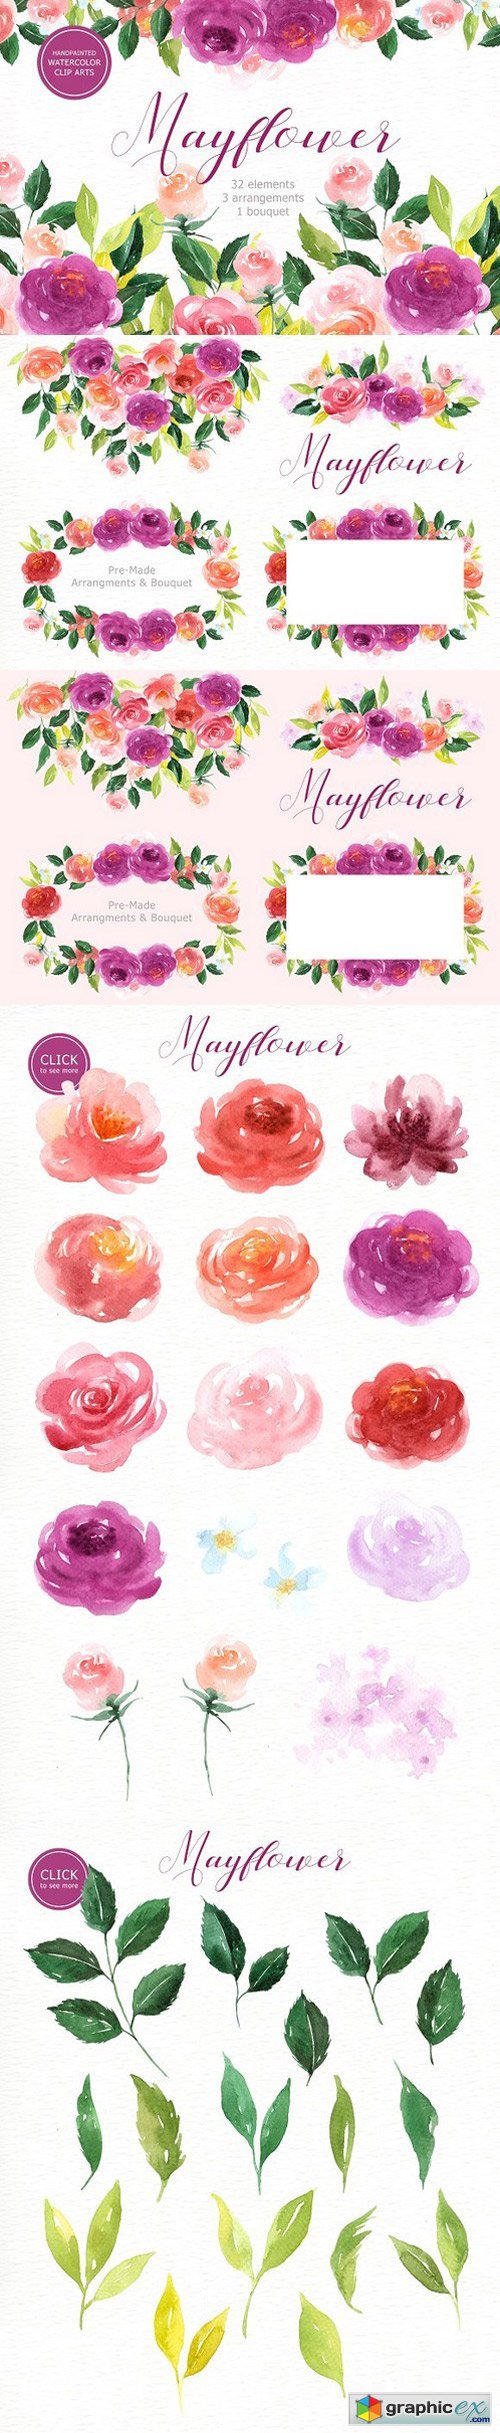 Mayflower Floral Watercolor clipart